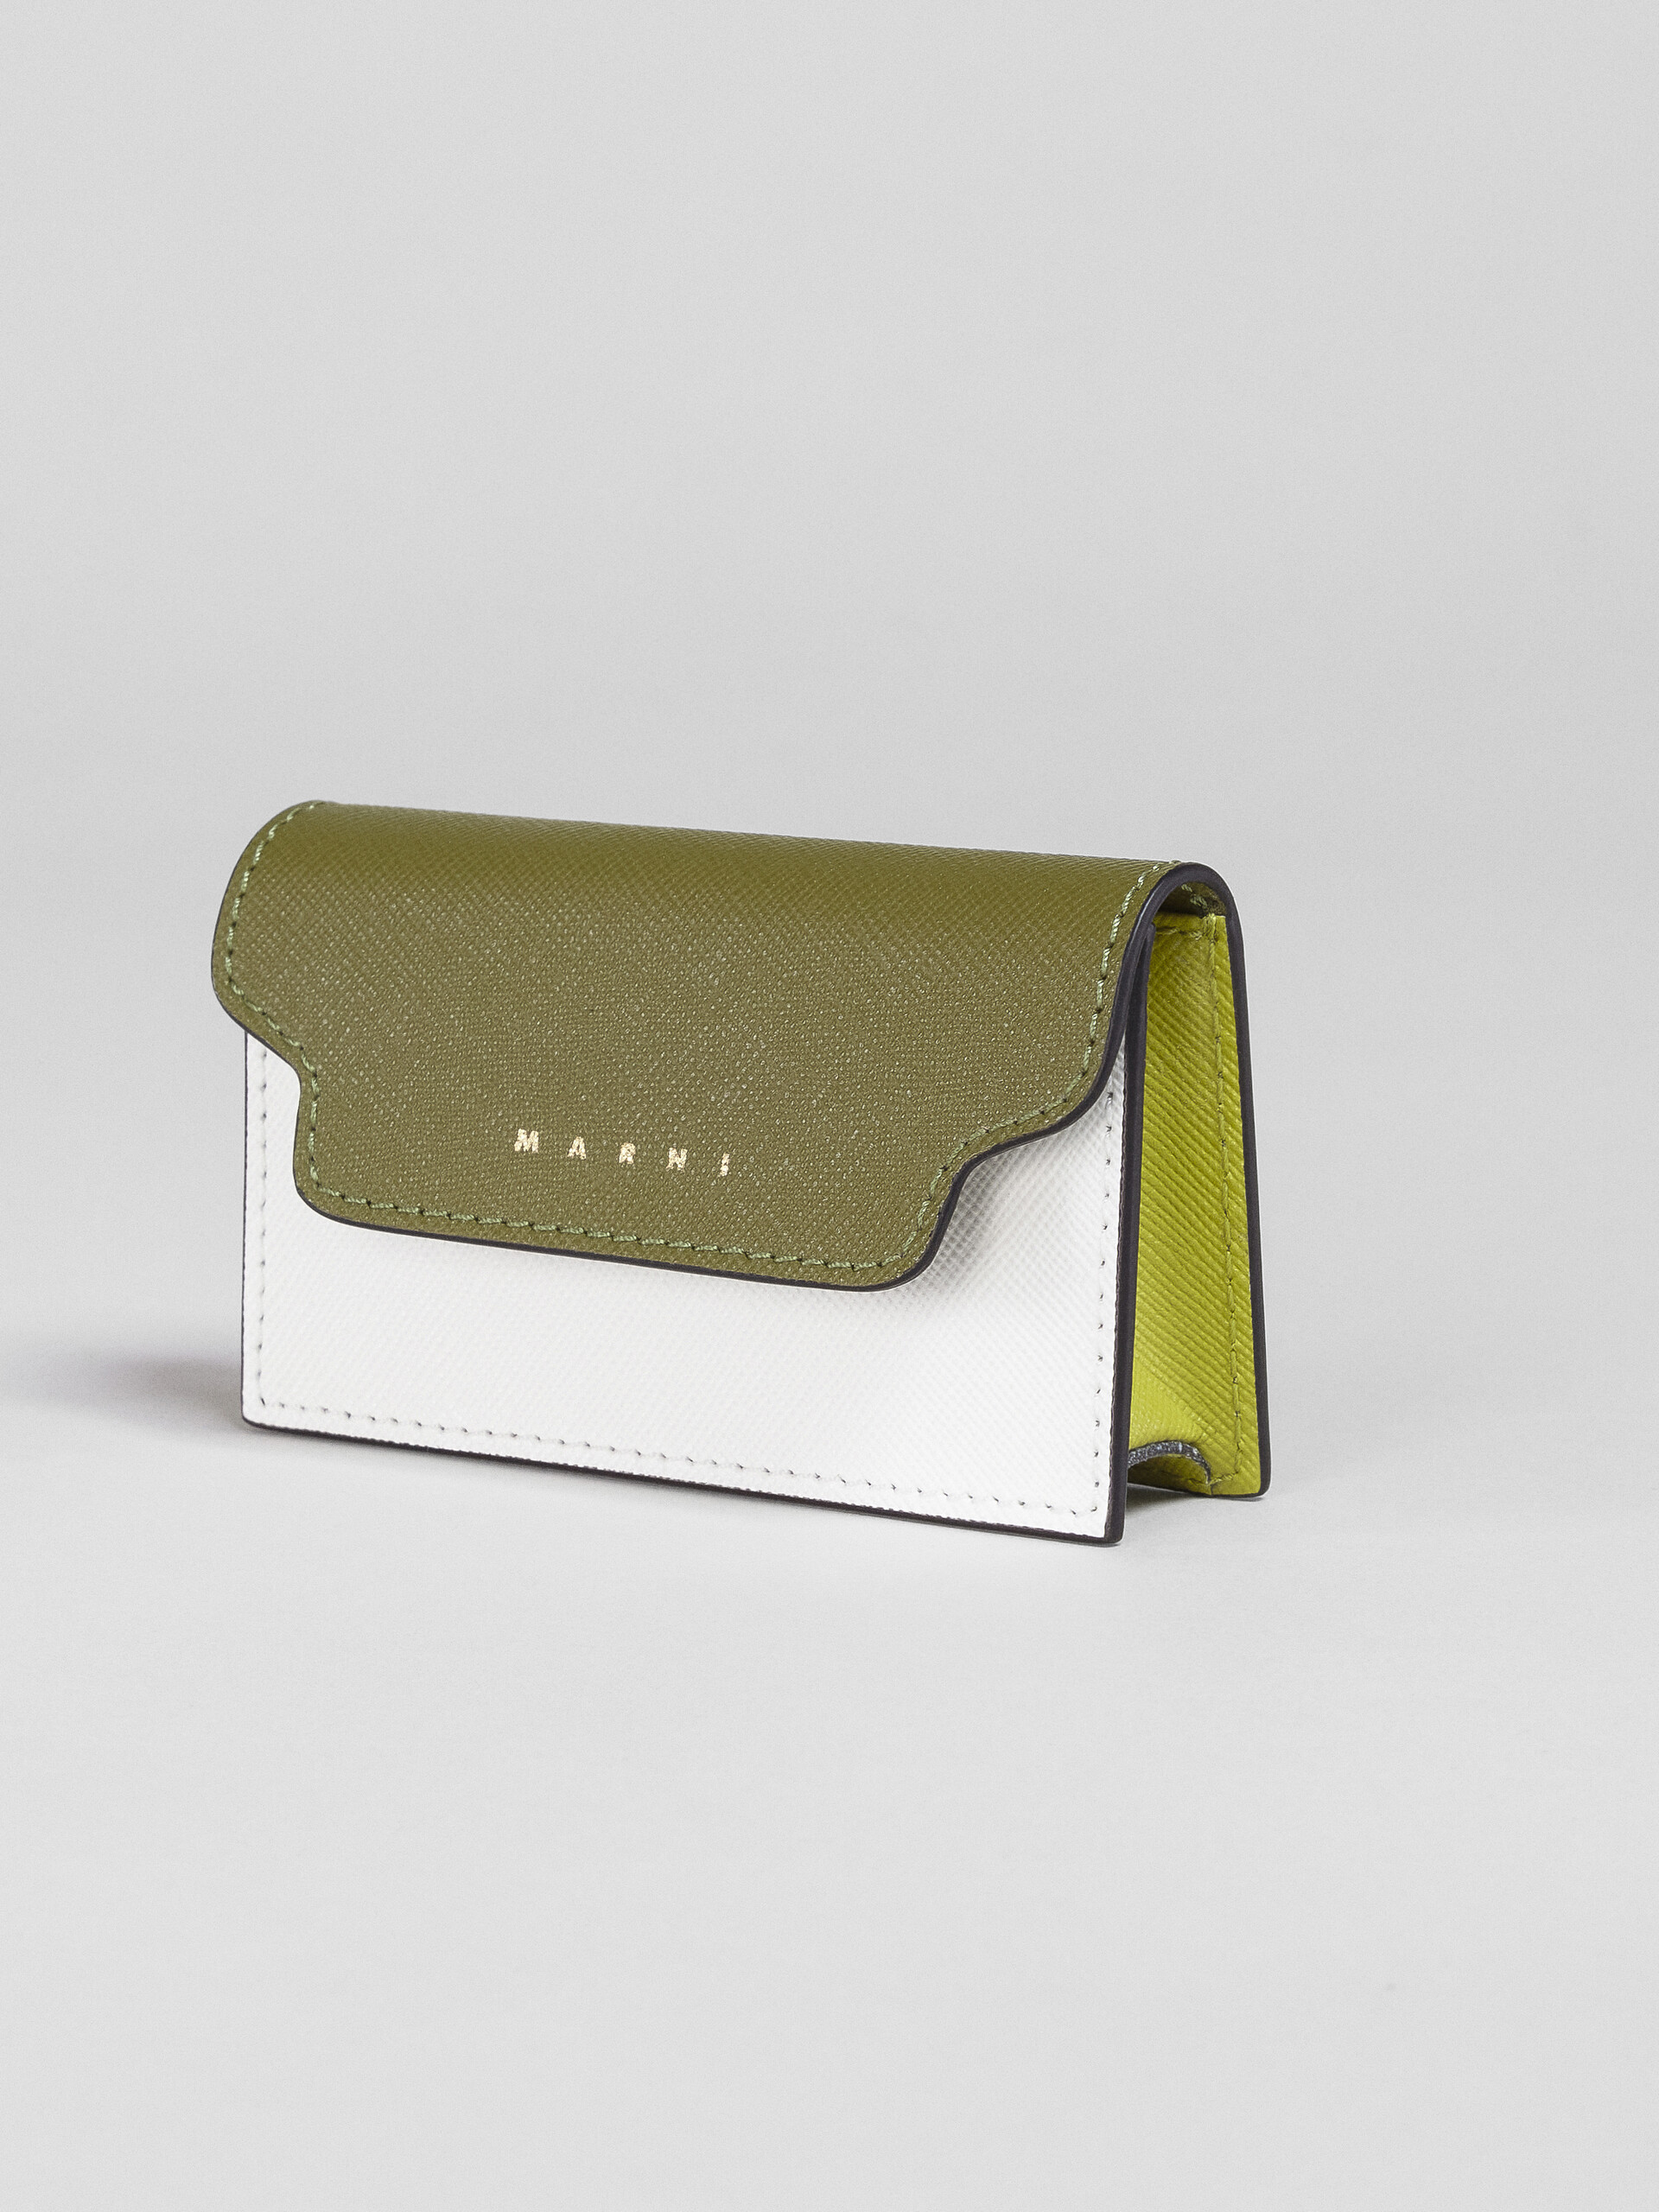 Tone on tone green and white saffiano business card case - Wallets - Image 4